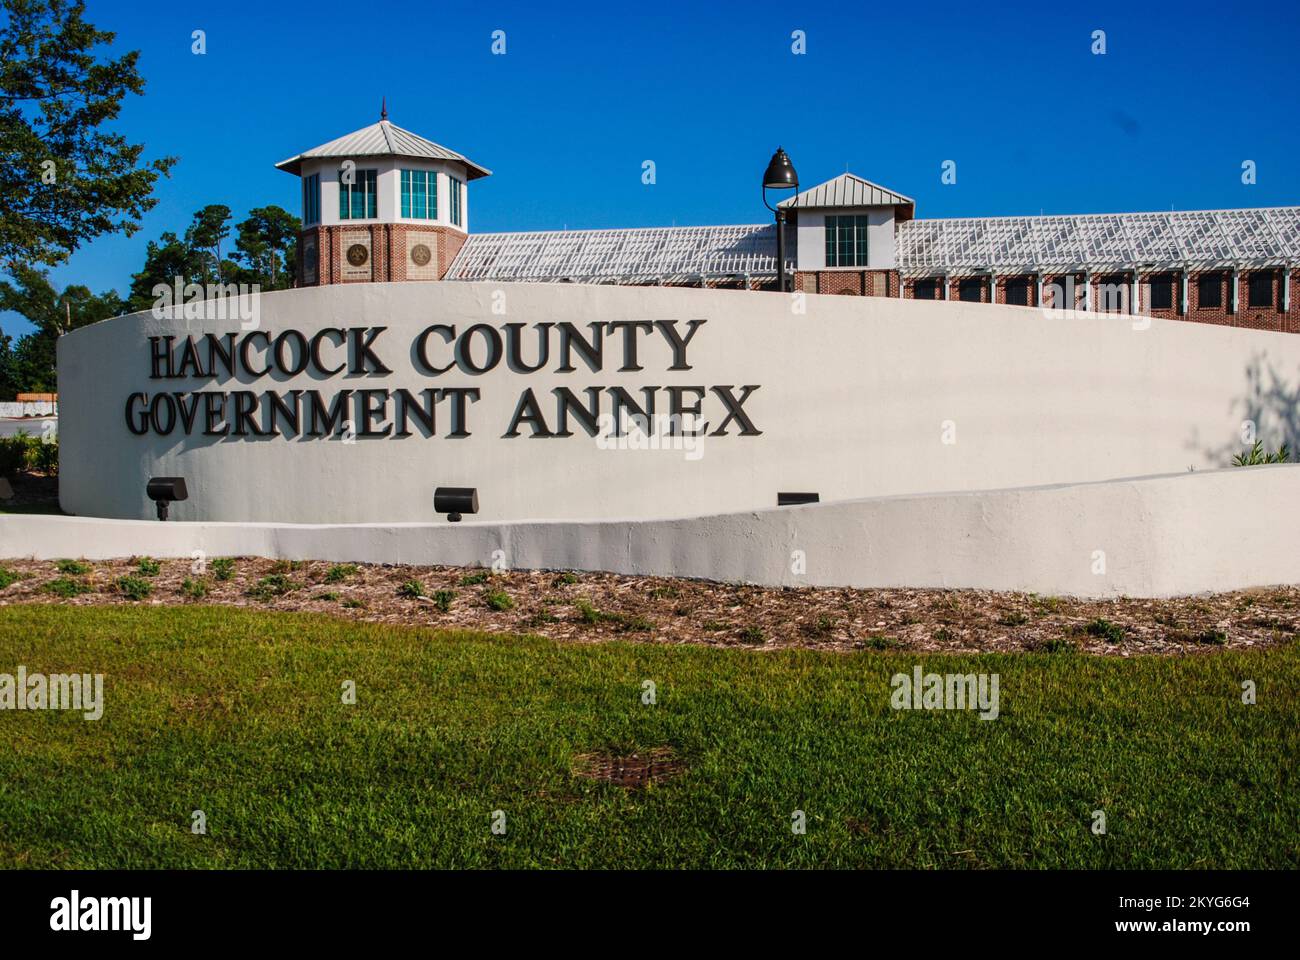 Bay Saint Louis, MS, September 20, 2011 - Hancock County Government Annex, Bay Saint Louis, Mississippi. Hancock County government services were compromised and degraded by Hurricane Katrina in 2005. The Hancock County Government Annex was constructed with Public Assistance (PA) funding from FEMA to assist in the restoration of Hancock County government services. Stock Photo